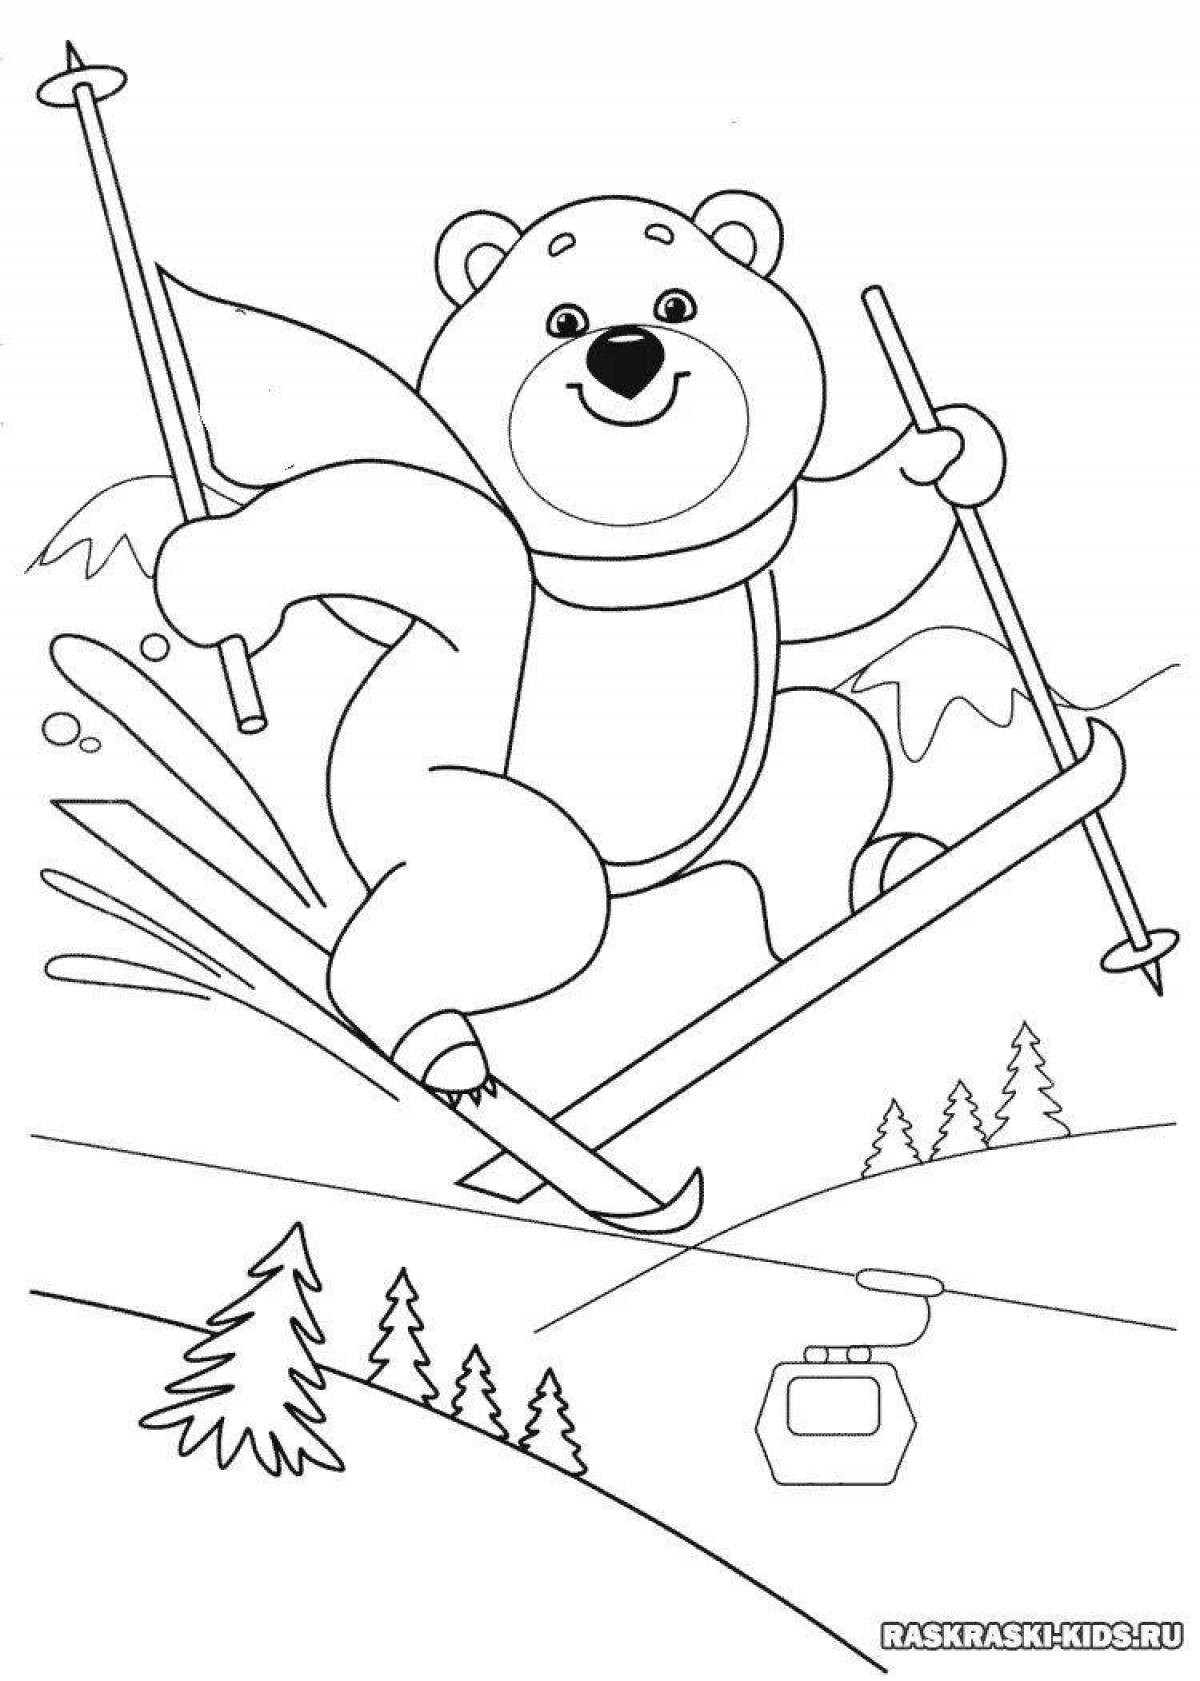 Colorful winter olympic games for kids